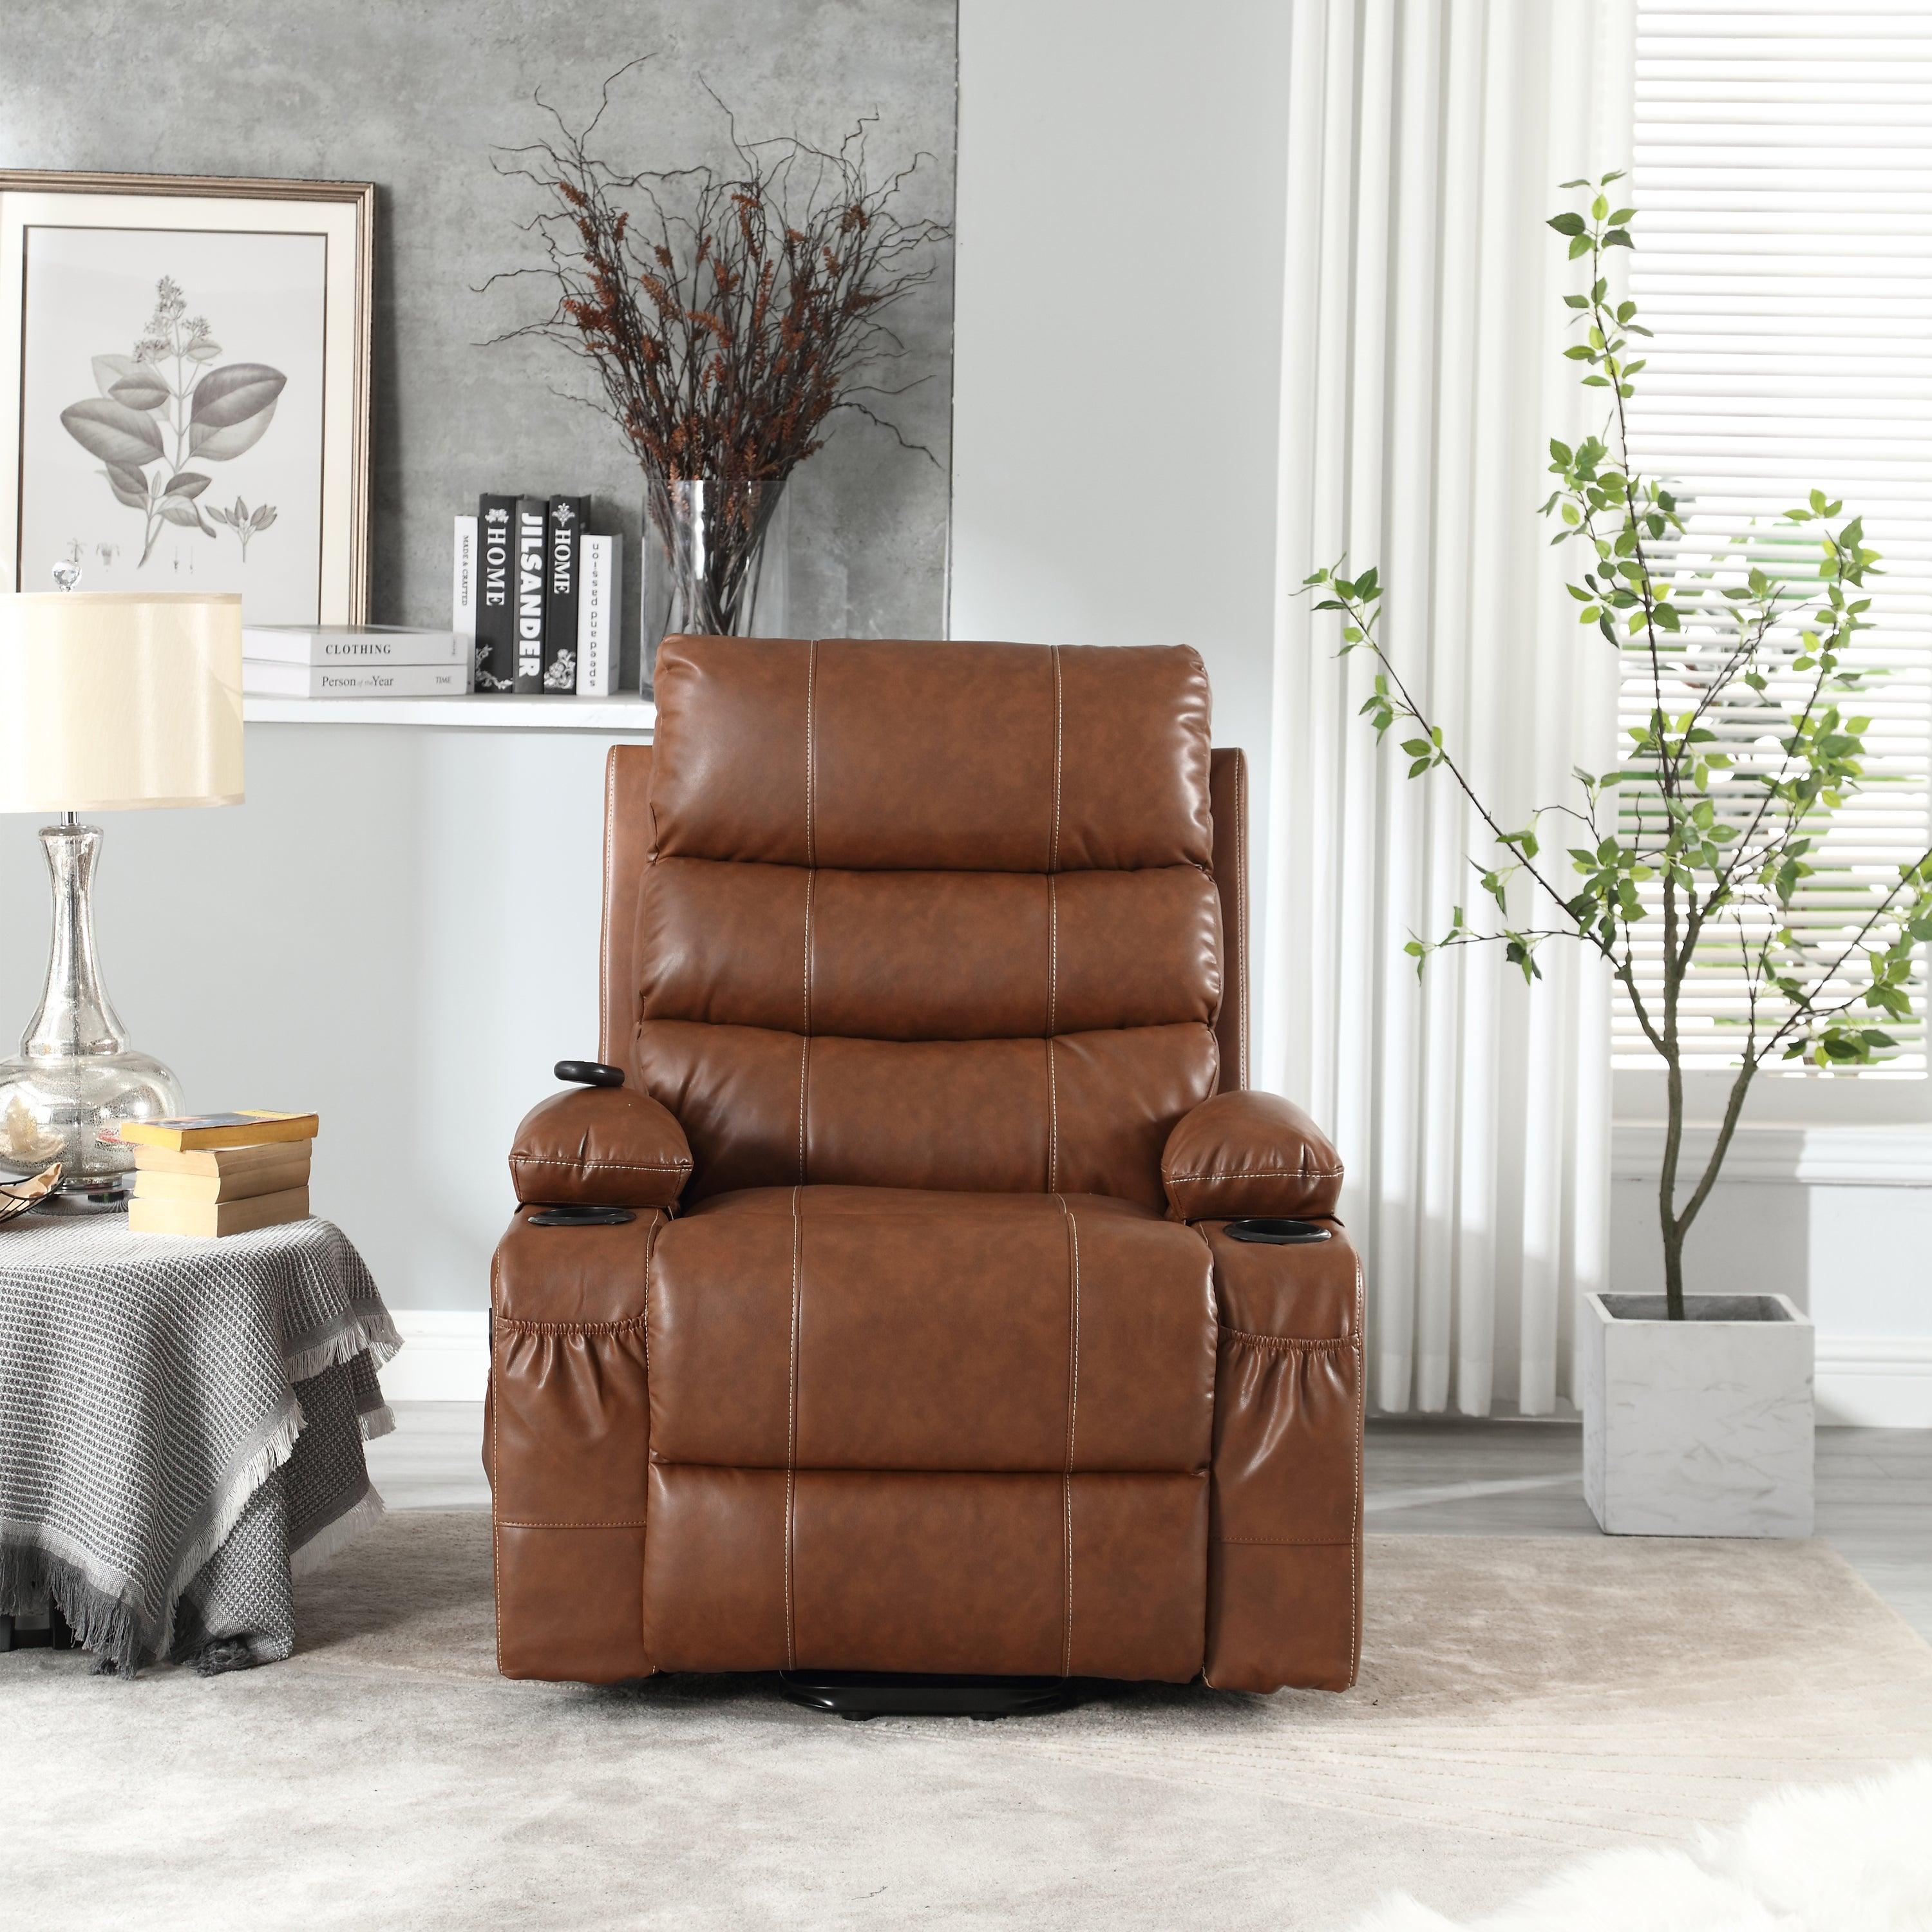 🆓🚛 21" Seat Width Electric Power Lift Recliner Chair Sofa for Elderly, 8 Point Vibration Massage & Lumber Heat, Remote Control, Side Pockets & Cup Holders, Brown